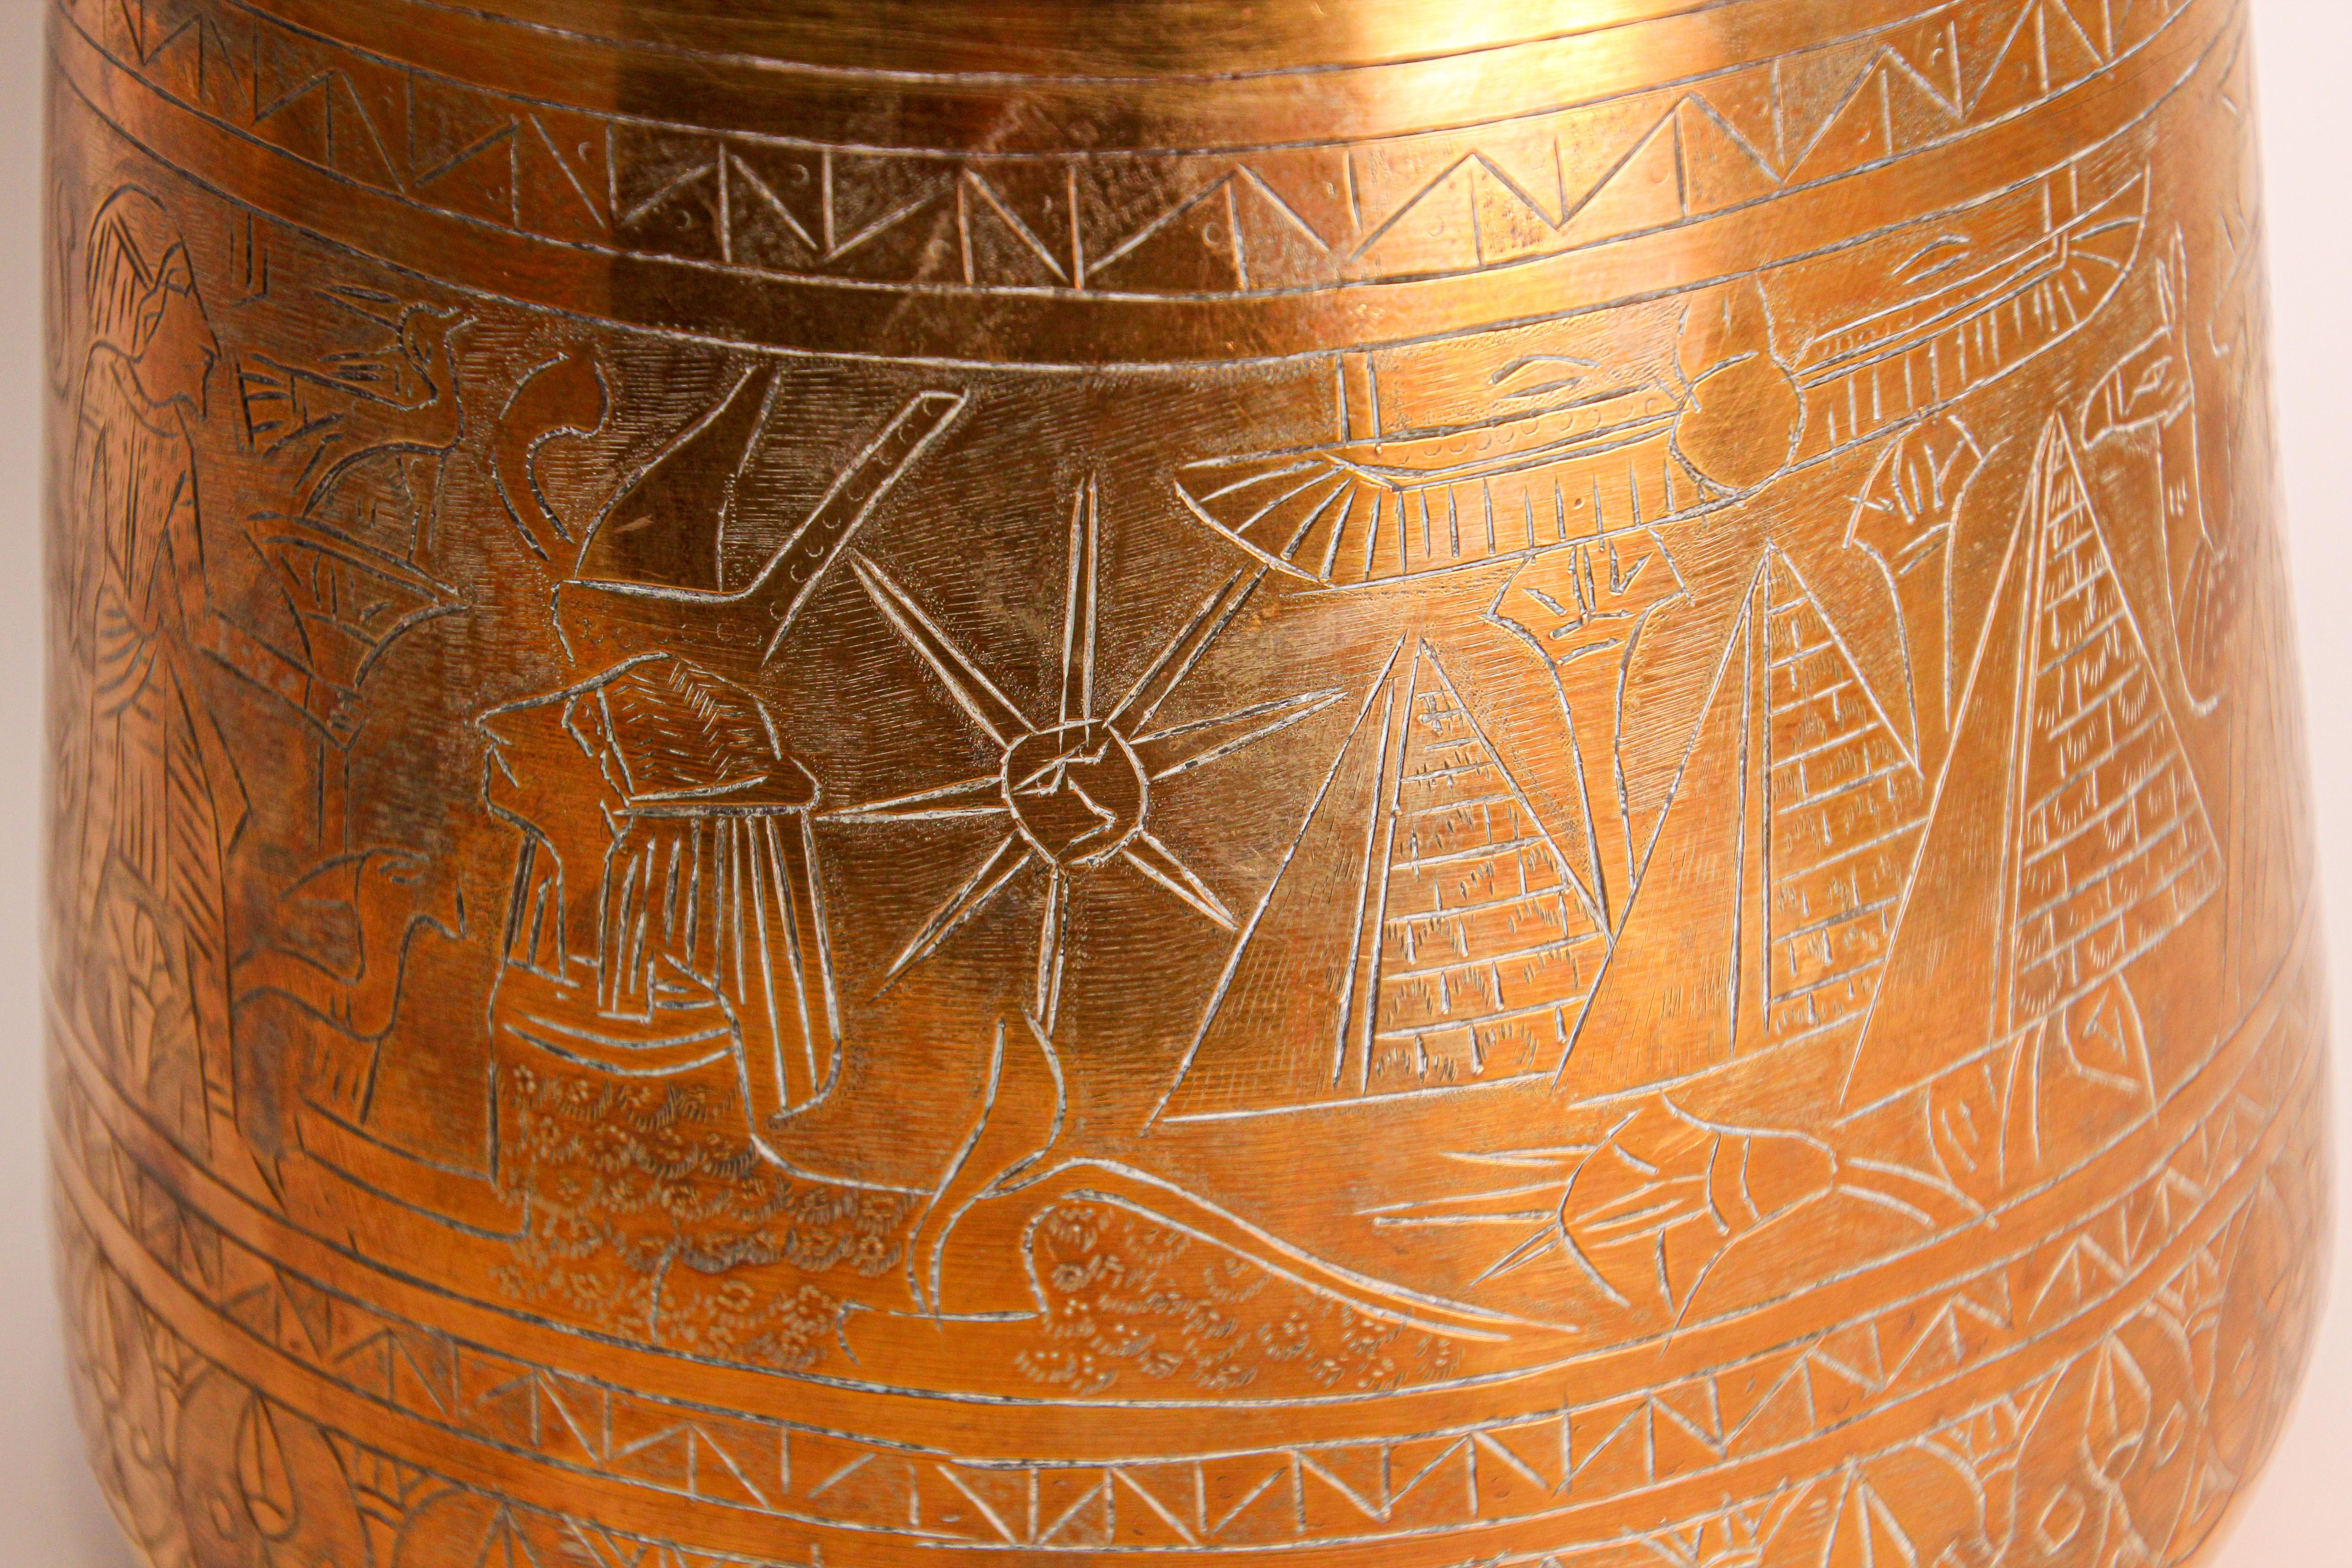 Hand Etched Egyptian Brass Vessel Jardiniere, 19th Century For Sale 4